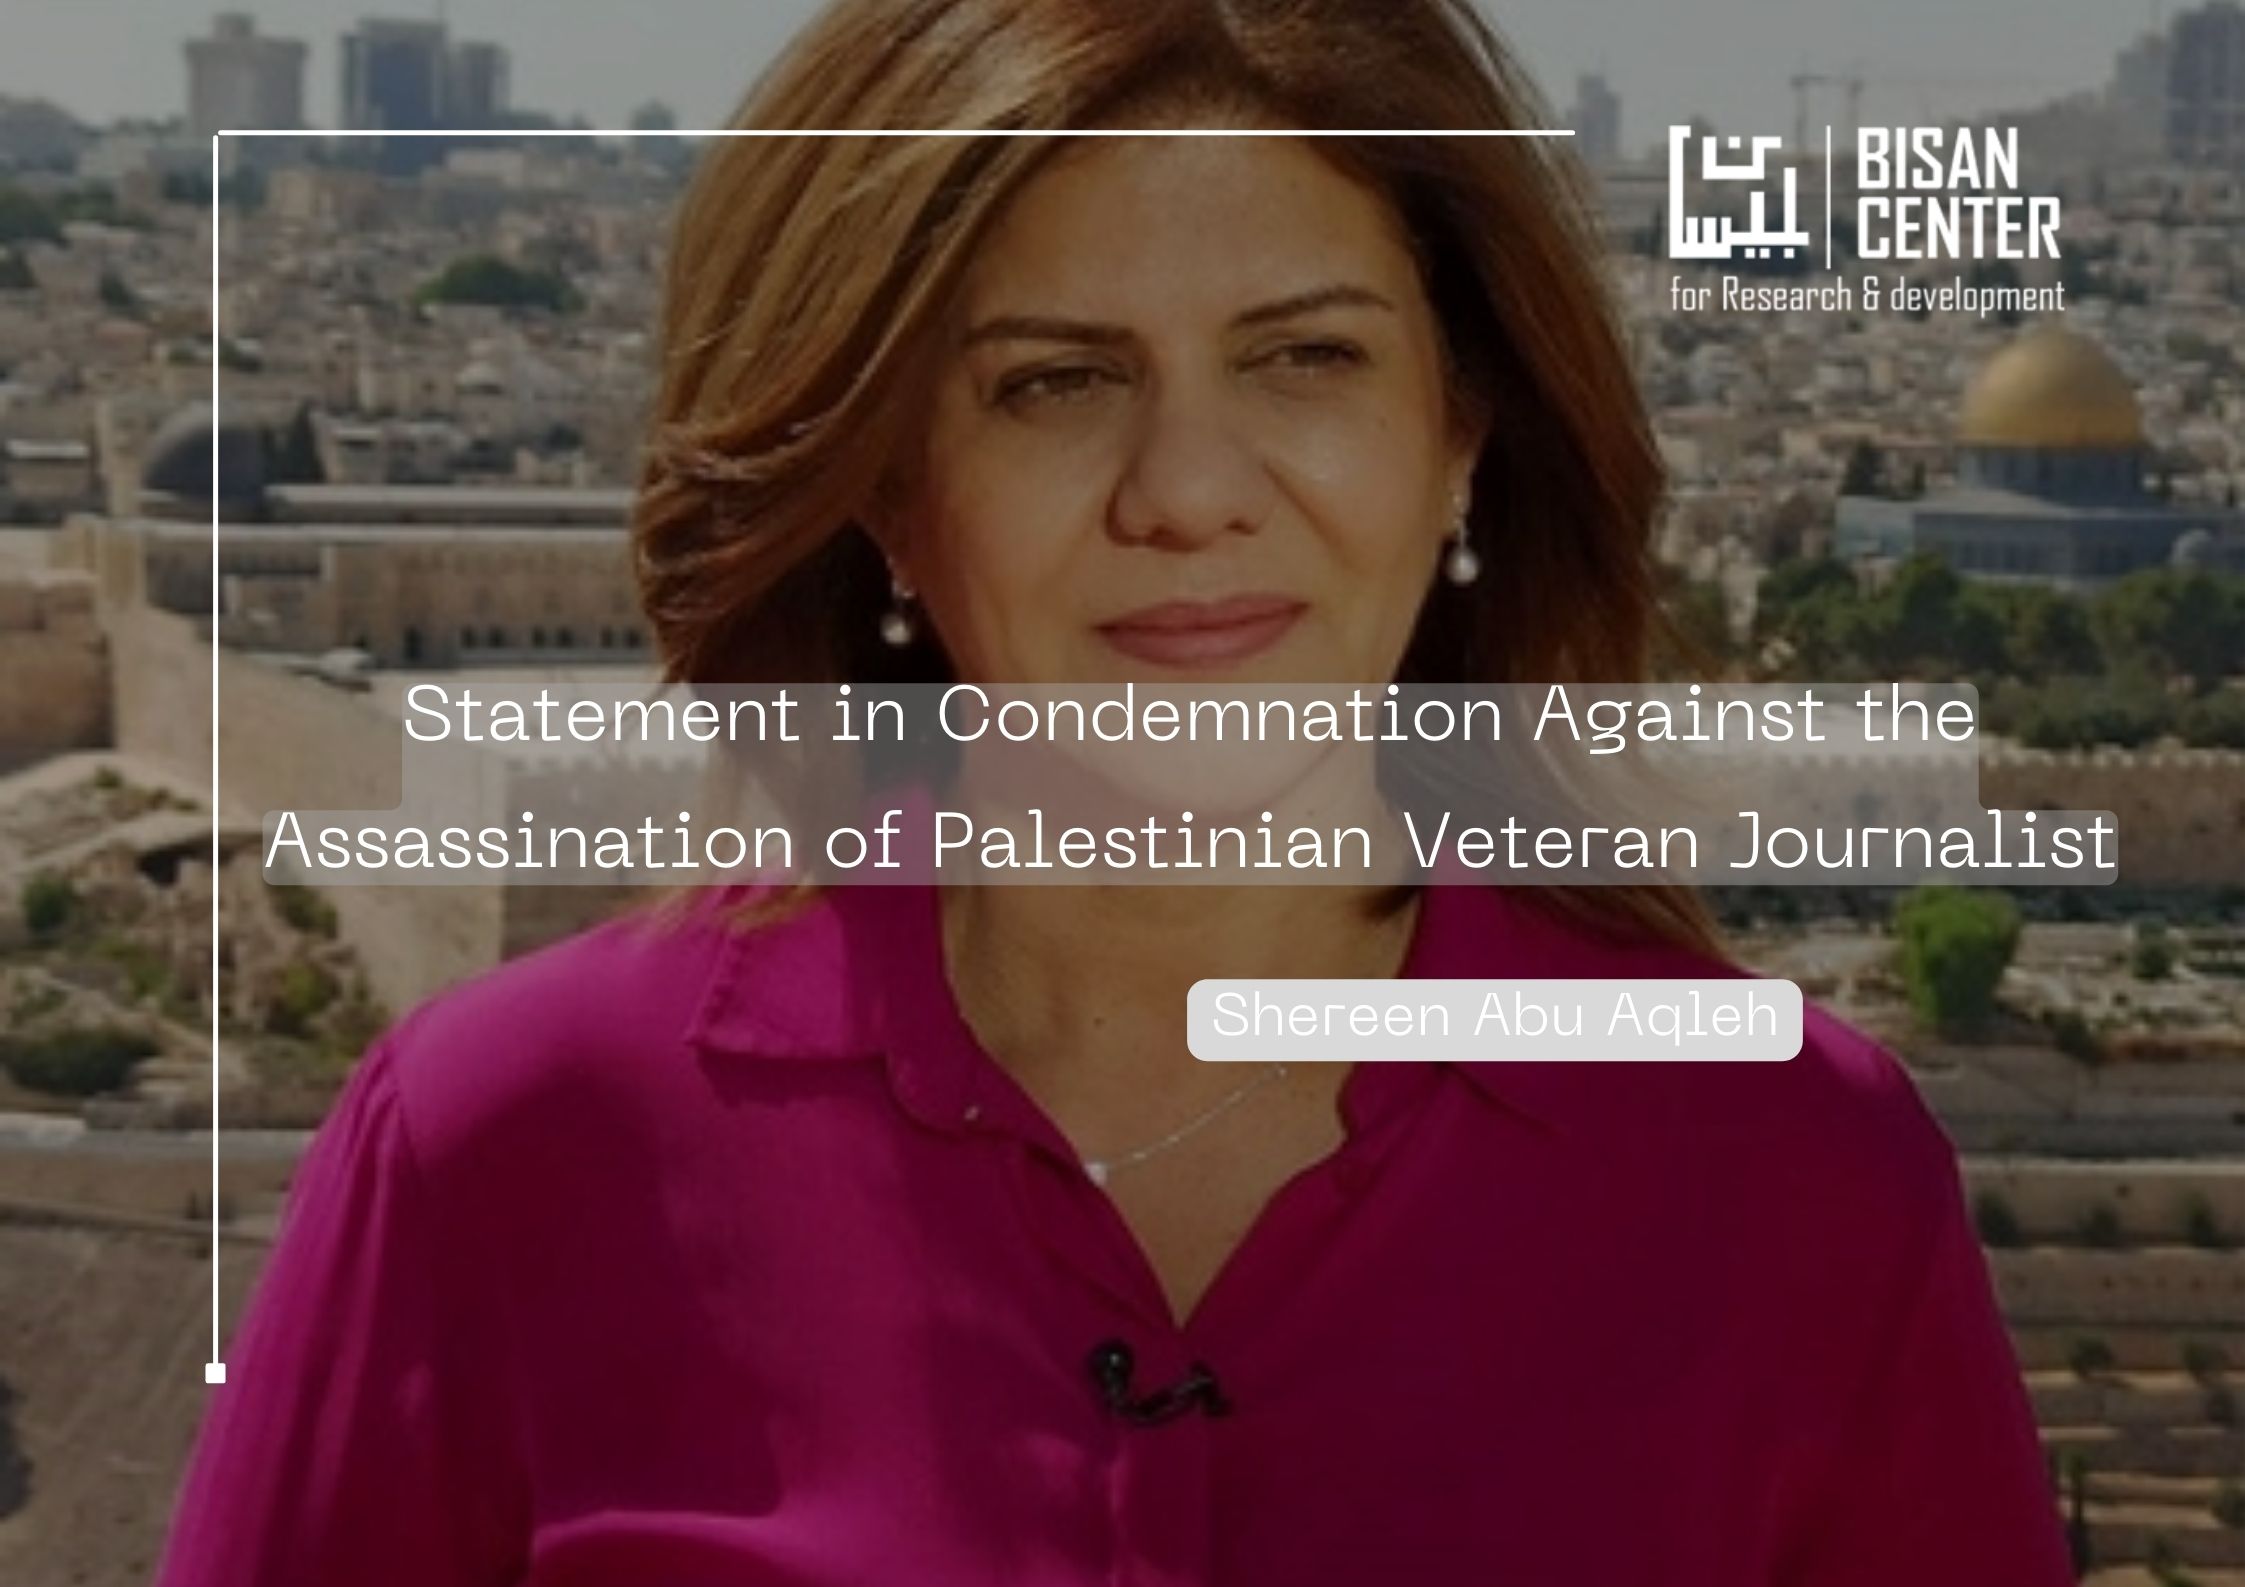 Statement in Condemnation Against the Assassination of Palestinian Veteran Journalist